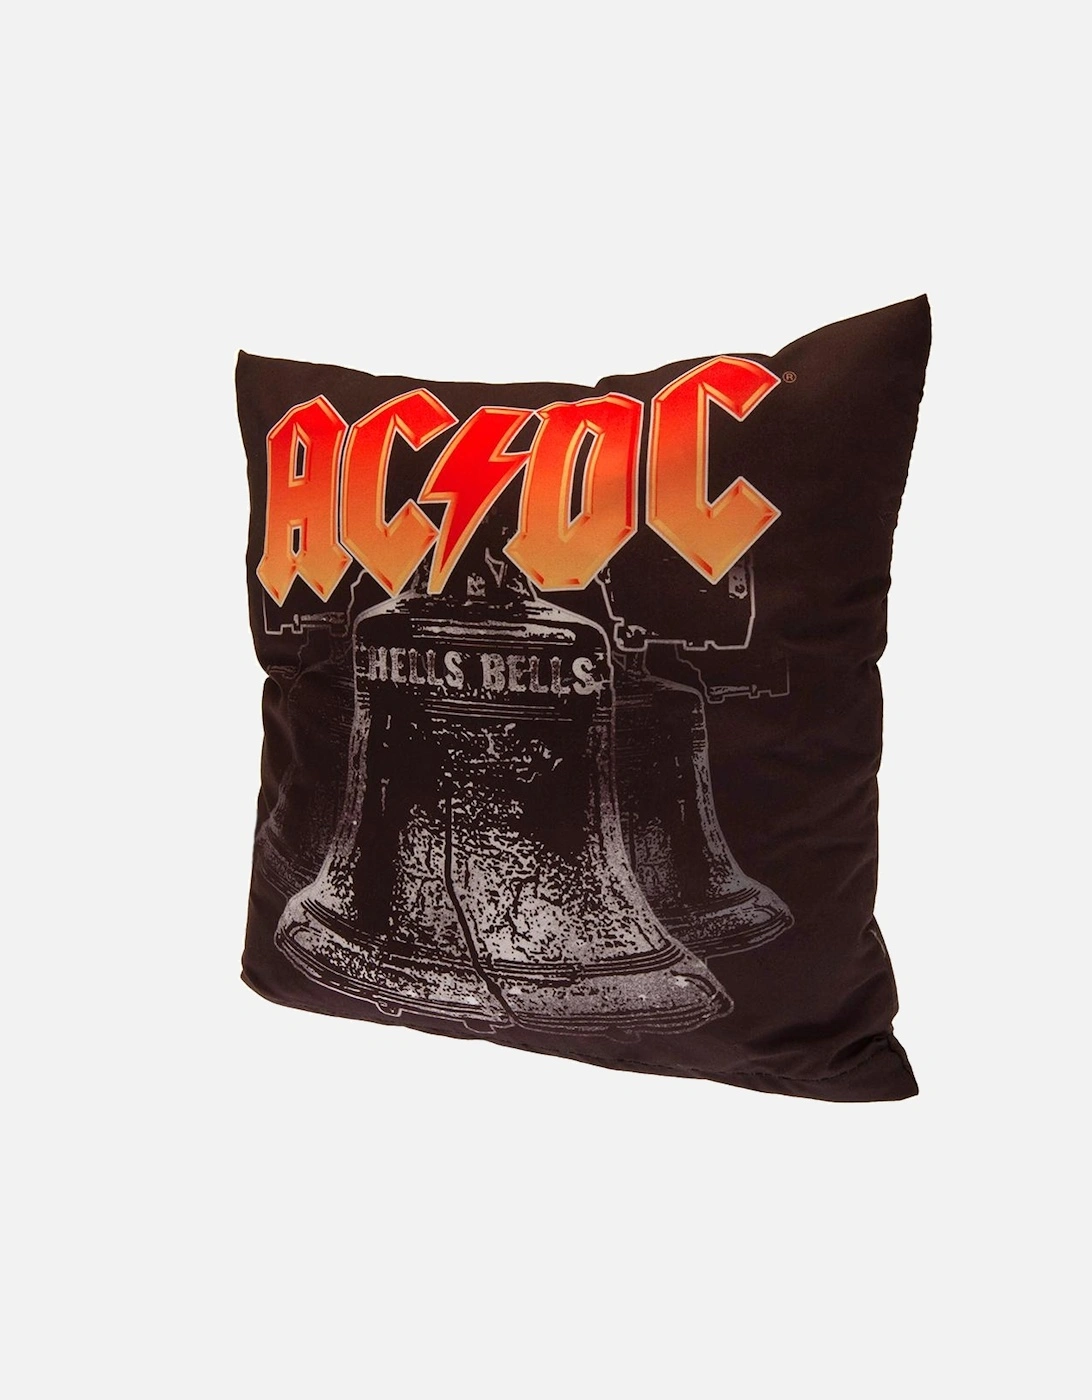 Hells Bells Filled Cushion, 2 of 1